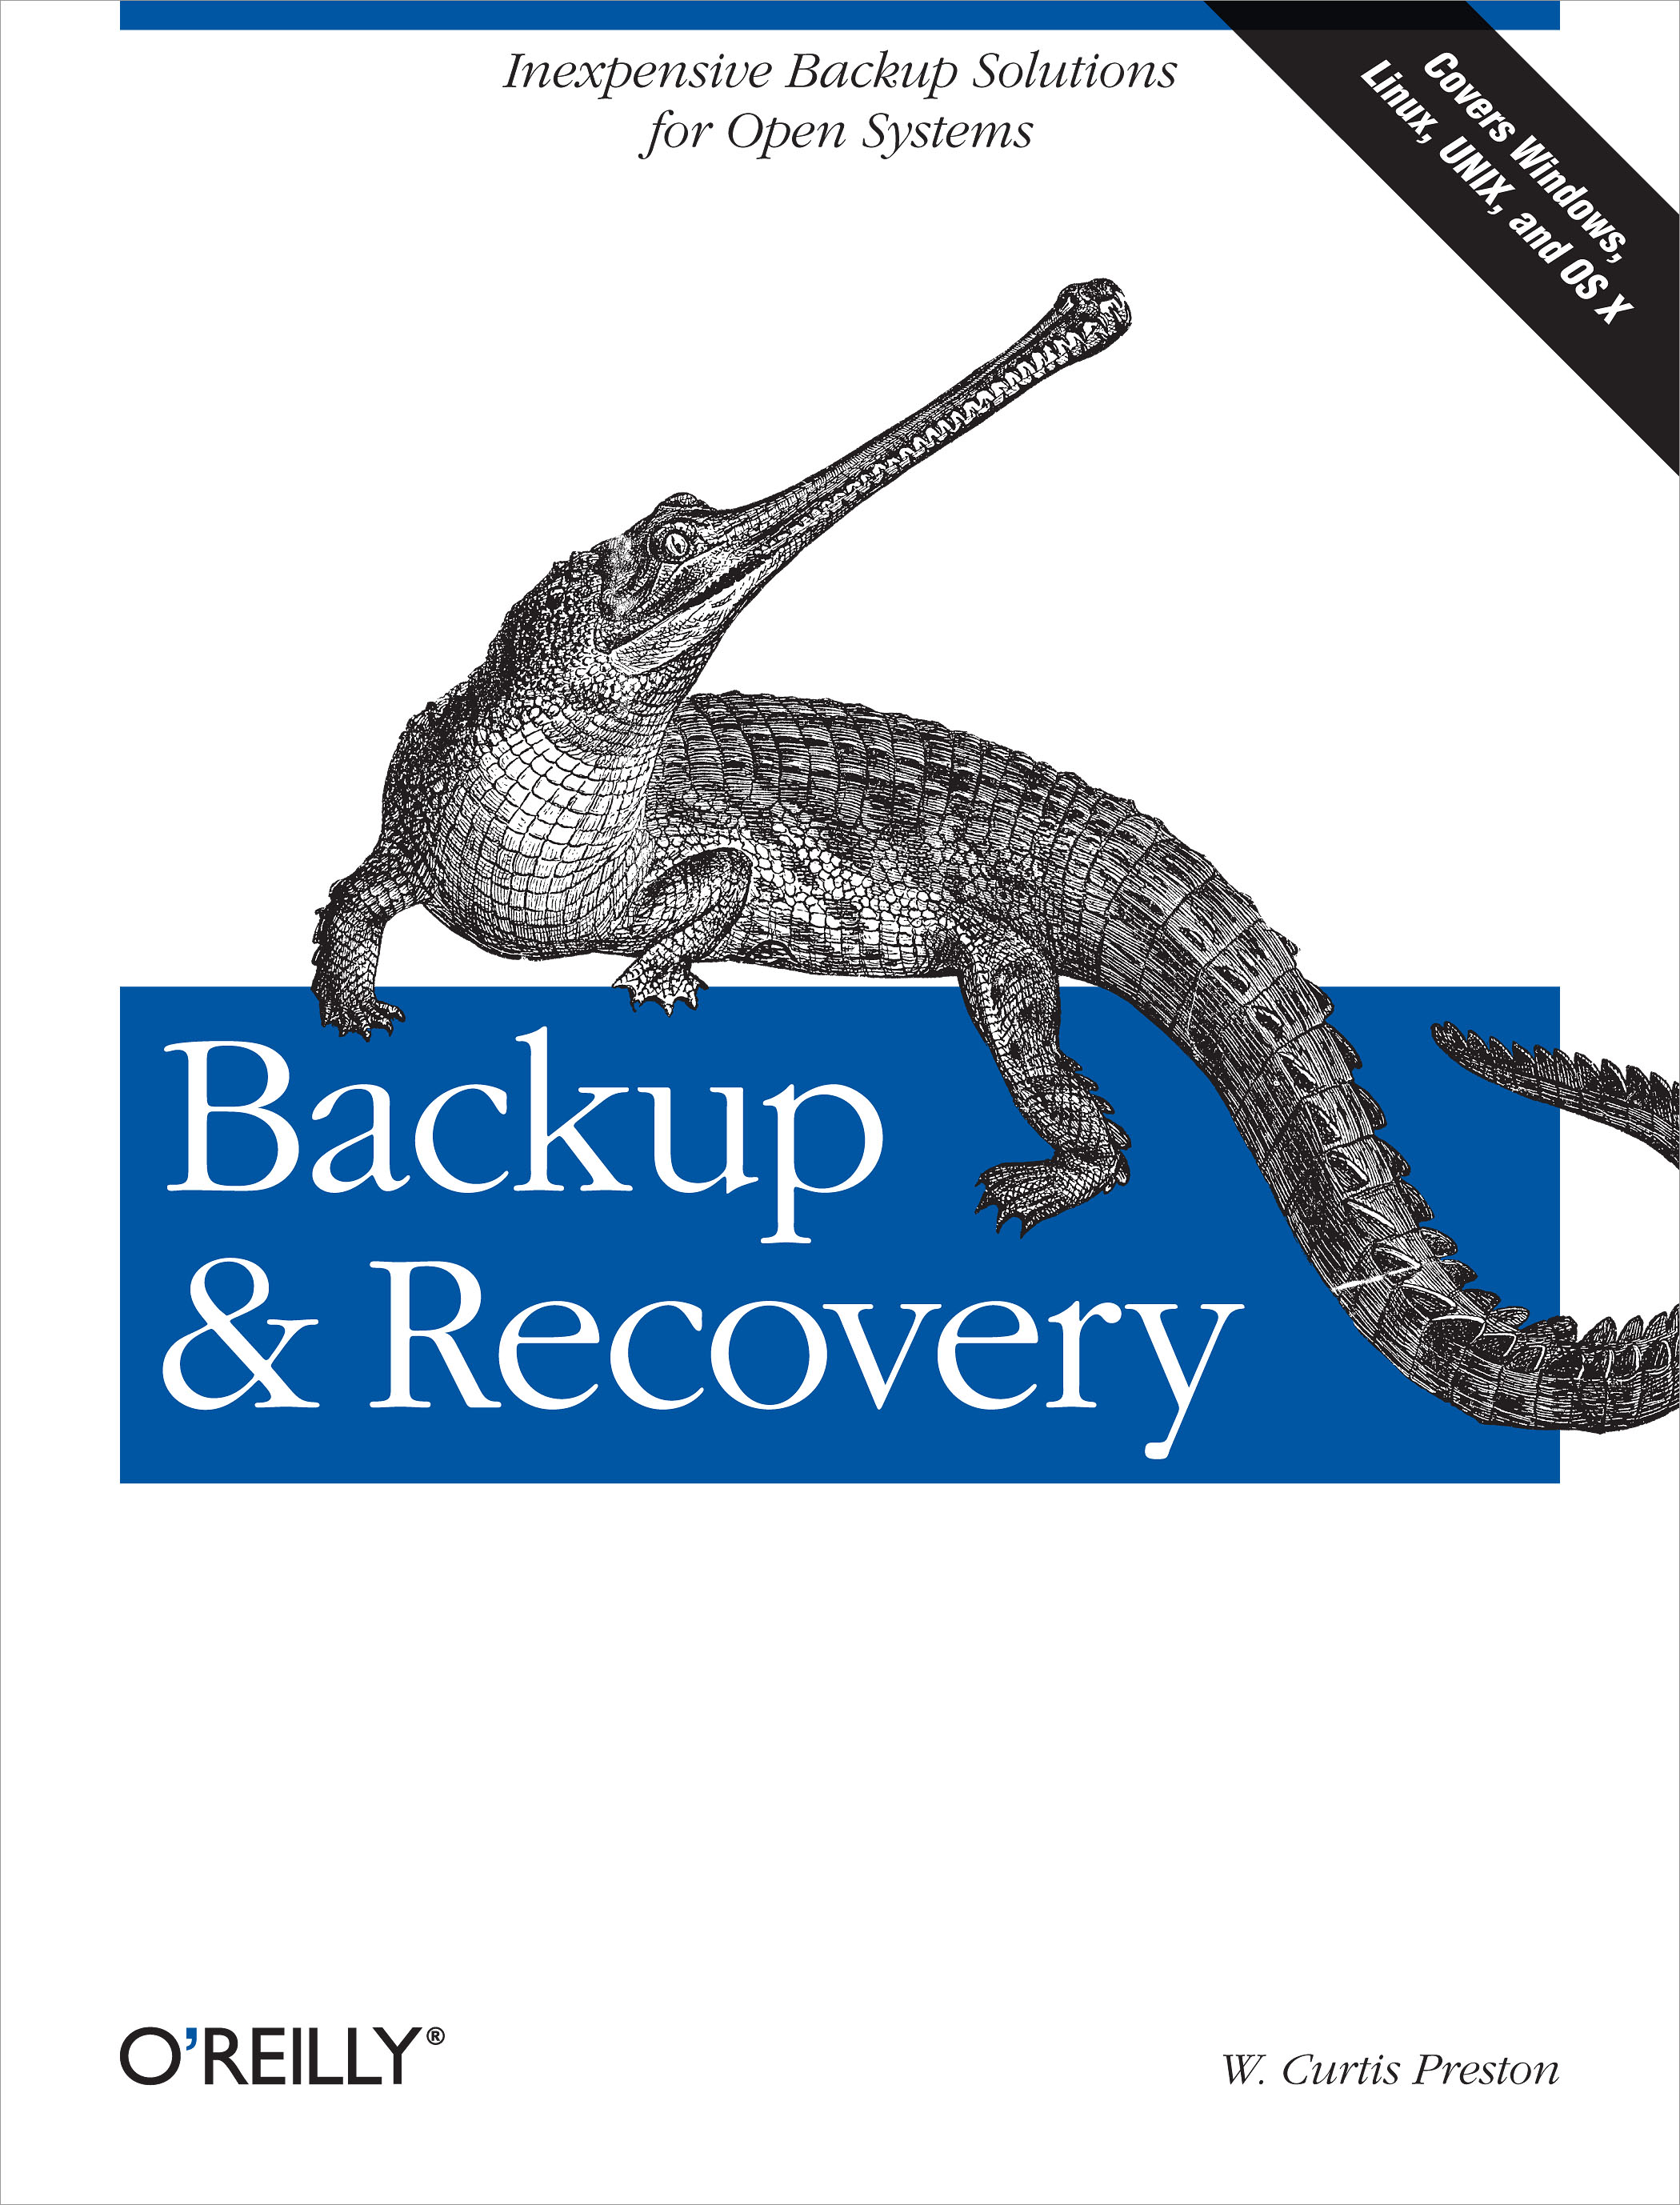 Backup & Recovery - 15-24.99